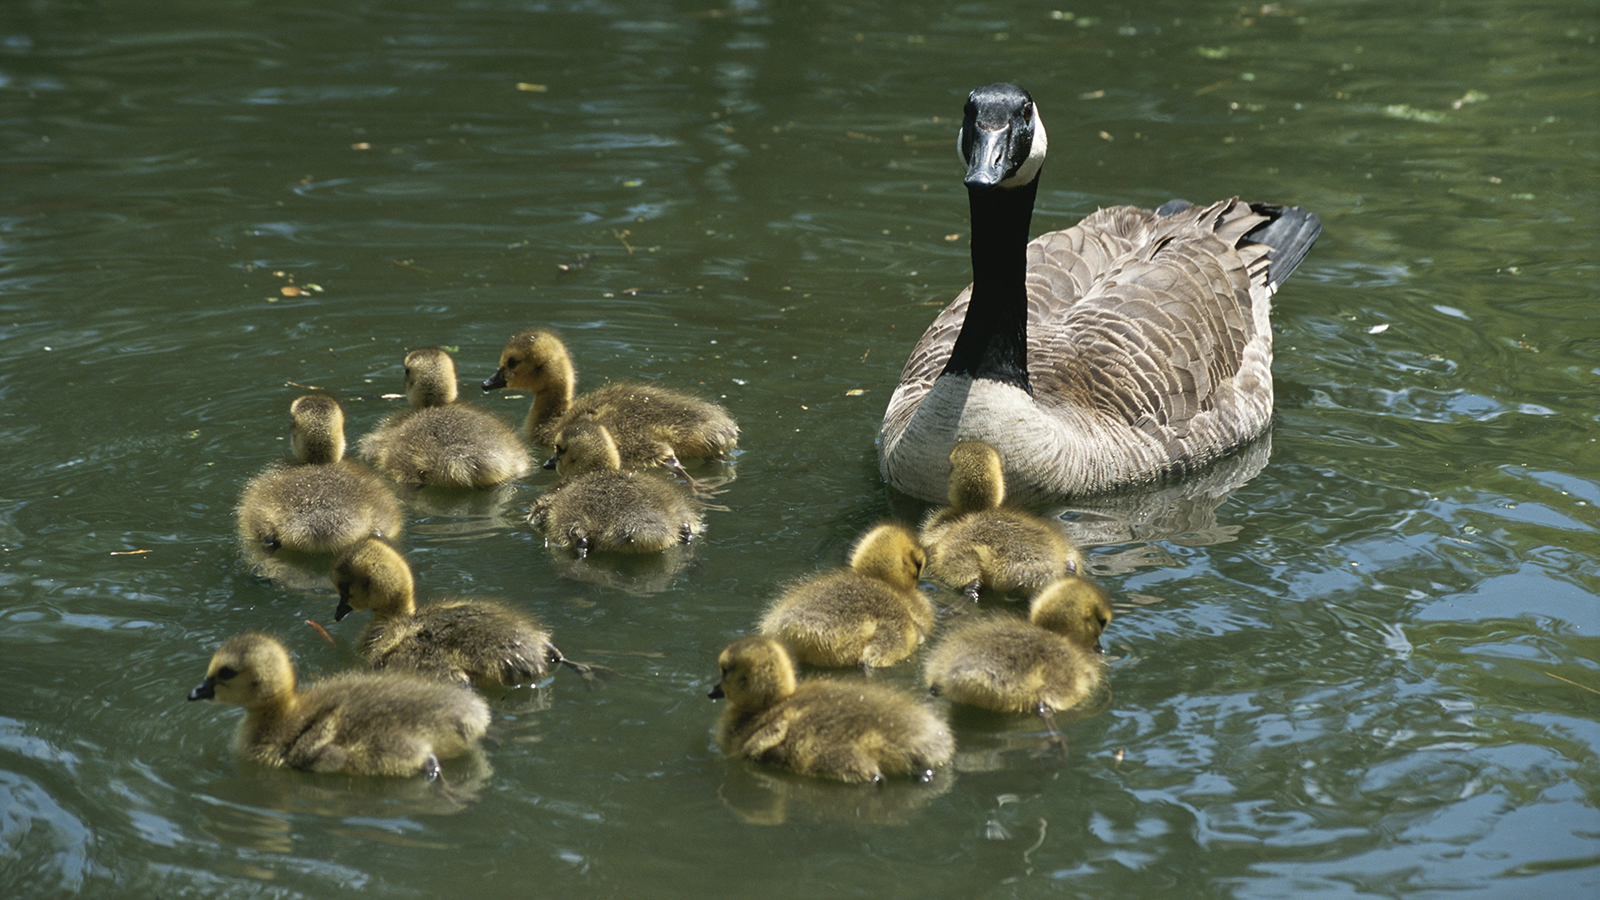 A mother Canada goose watches over ten fuzzy babies as they swim.